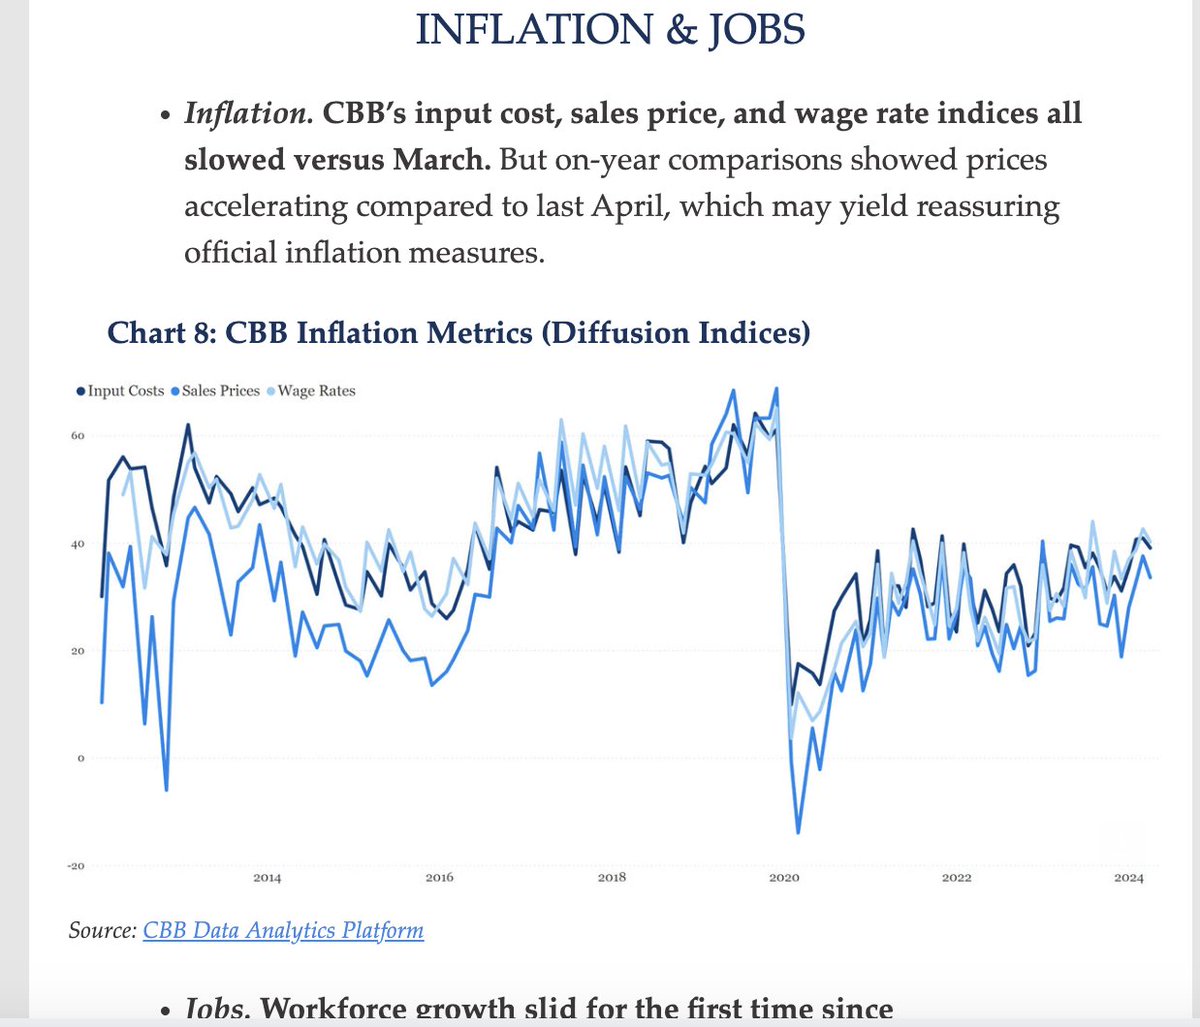 What did @ChinaBeigeBook proprietary inflation gauges reveal in Apr? 'CBB’s input cost, sales price, and wage rate indices all slowed versus March. But on-year comparisons showed prices accelerating compared to last April, which may yield reassuring official inflation measures.'